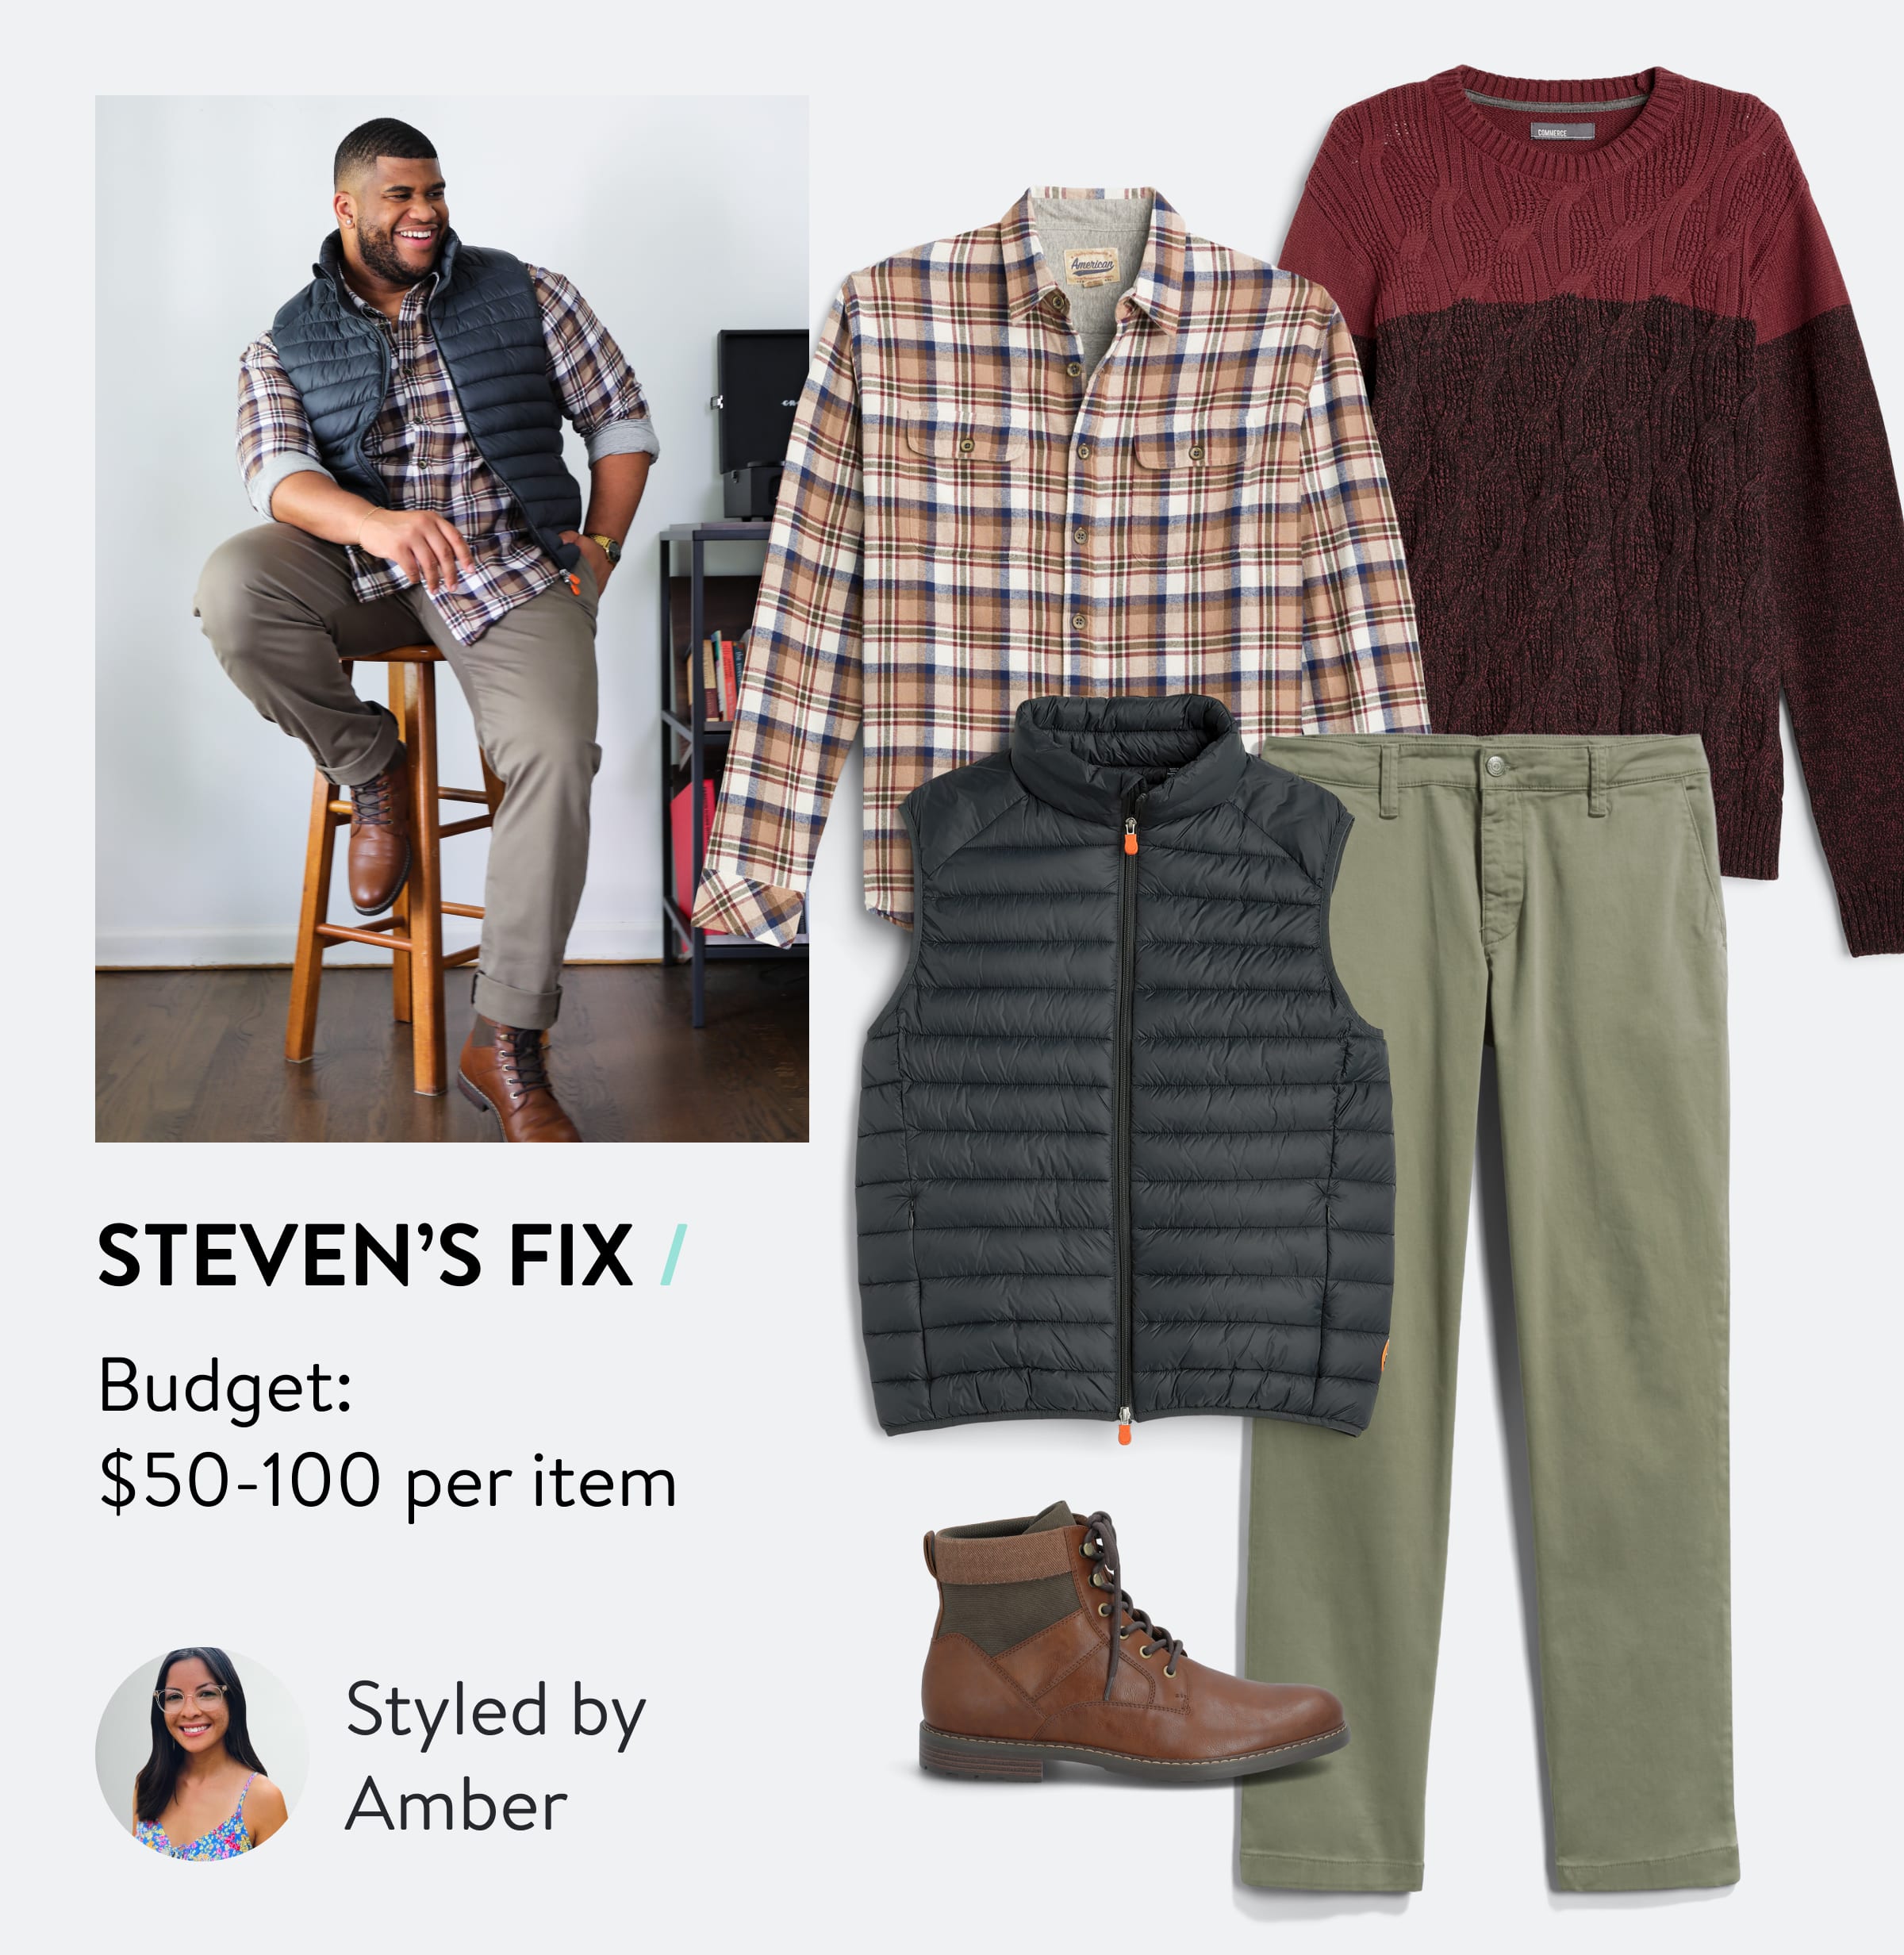 Steven’s Fix. Budget: $50-100 per item. Styled by Amber. Man wearing plaid shirt, navy down vest, green chino pants and brown boots, selection of Stitch Fix outfit, Stitch Fix Stylist wearing floral top and glasses